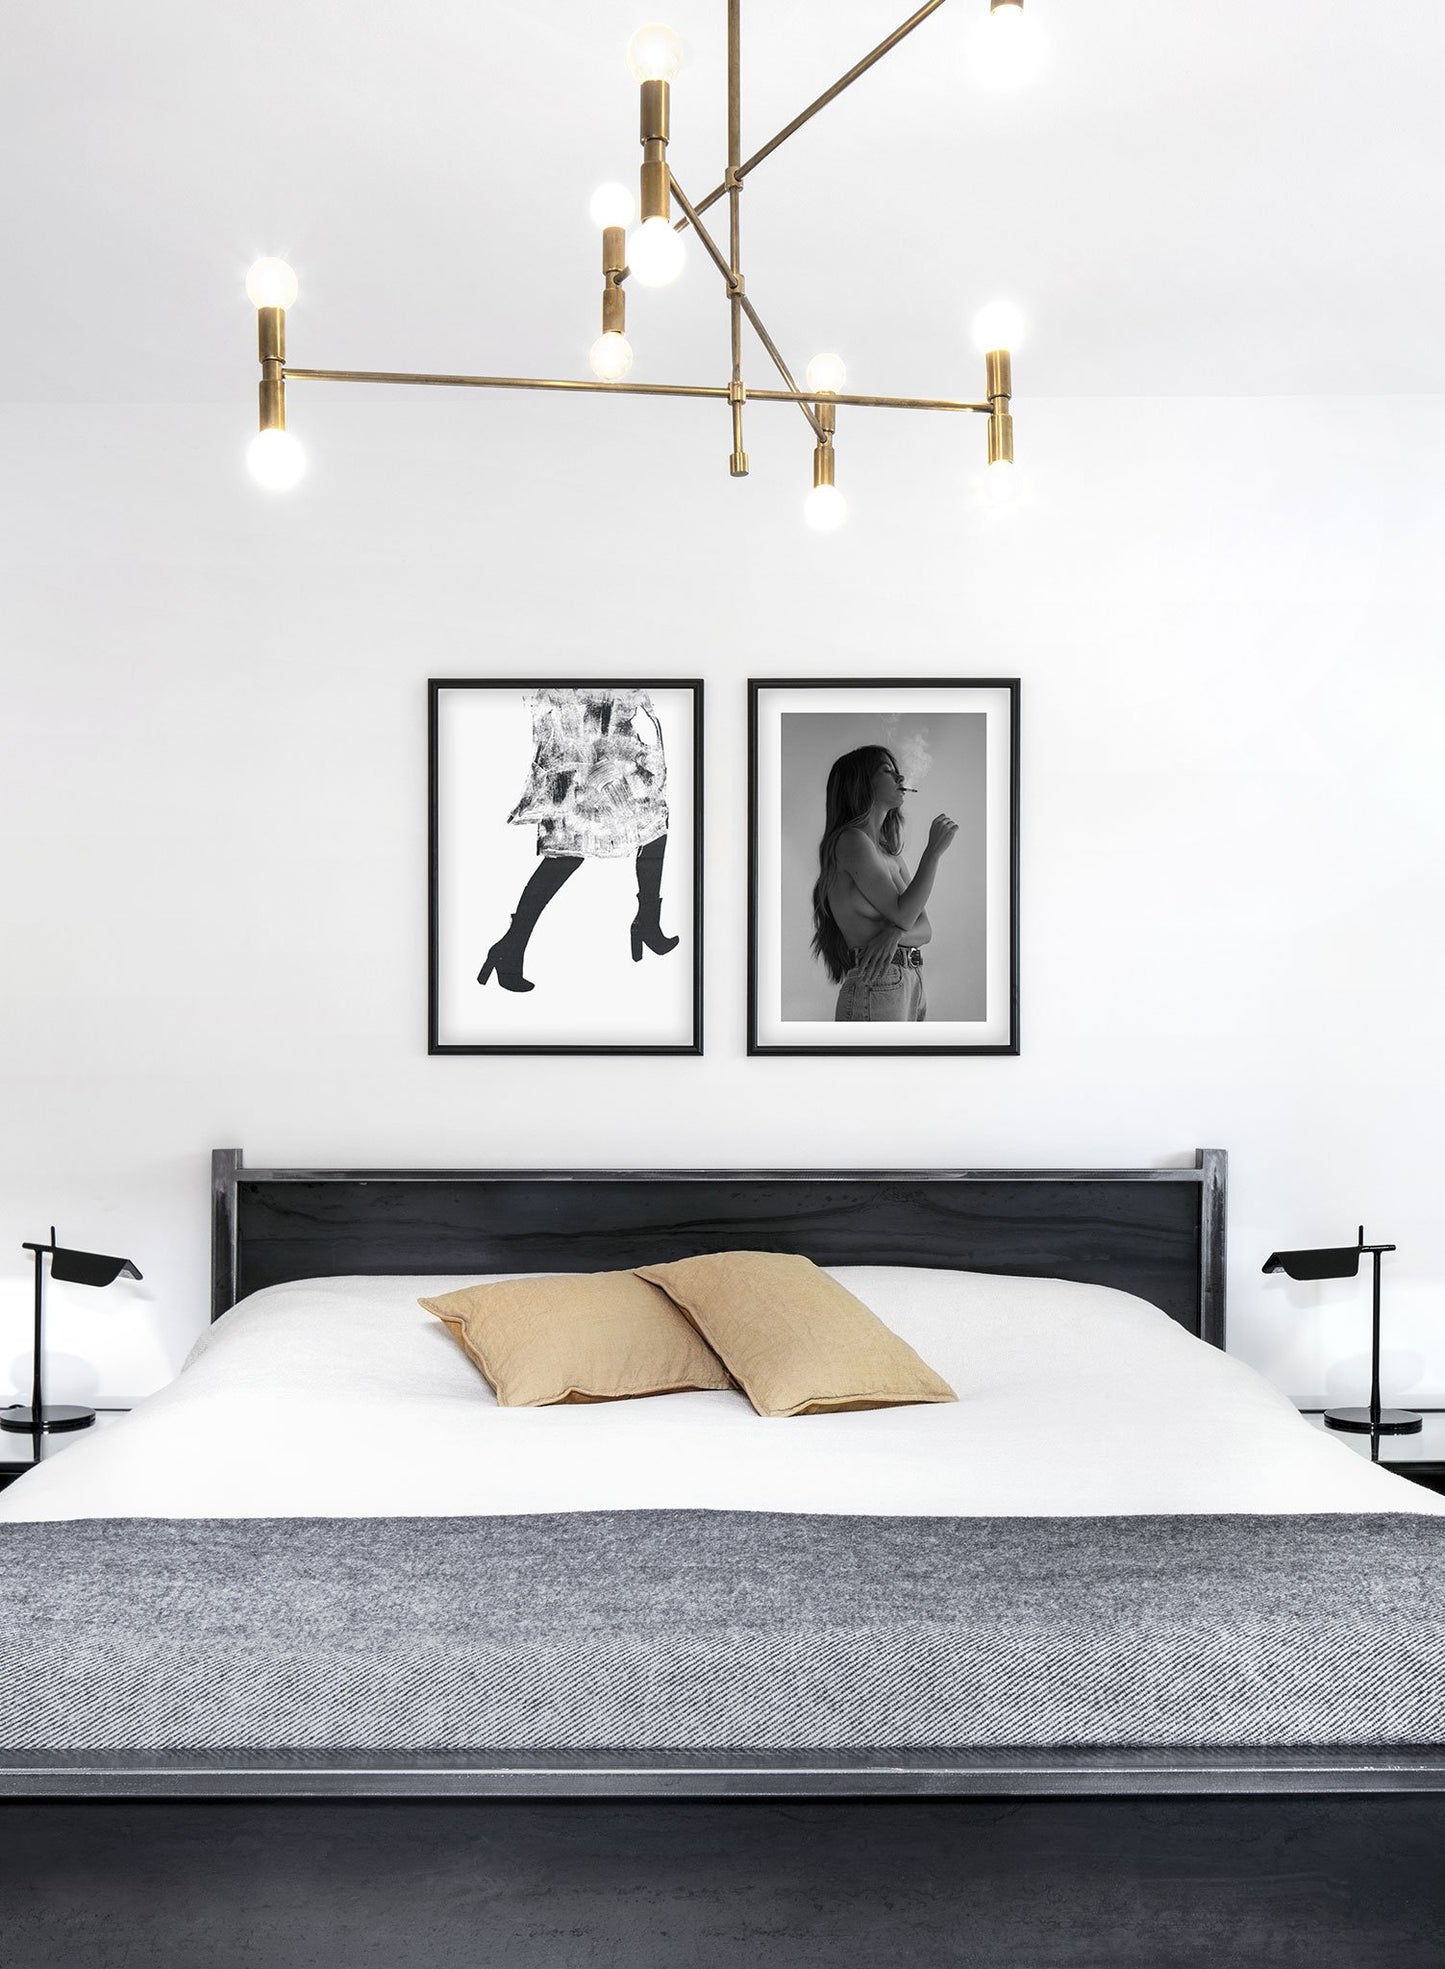 Black and white fashion photography poster by Opposite Wall with topless woman smoking cigarette - Lifestyle Duo - Bedroom